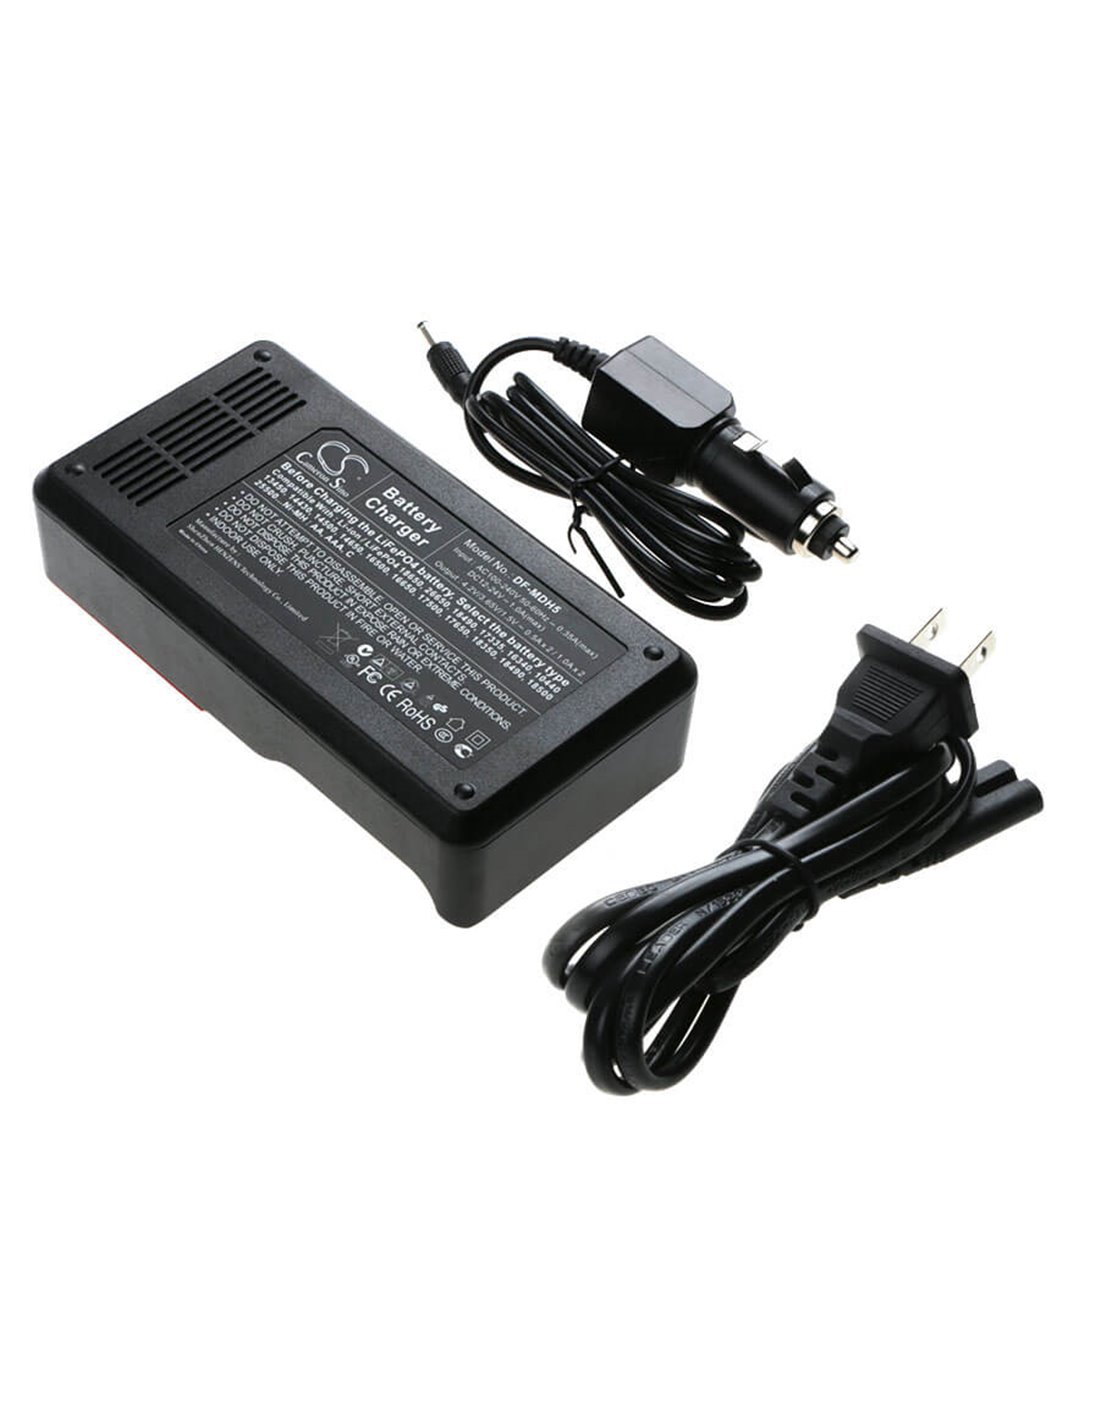 Mains Double Slot Charger for AA, AAA 18650 Charges NiMh & Lithium Ion Cells USA Plug